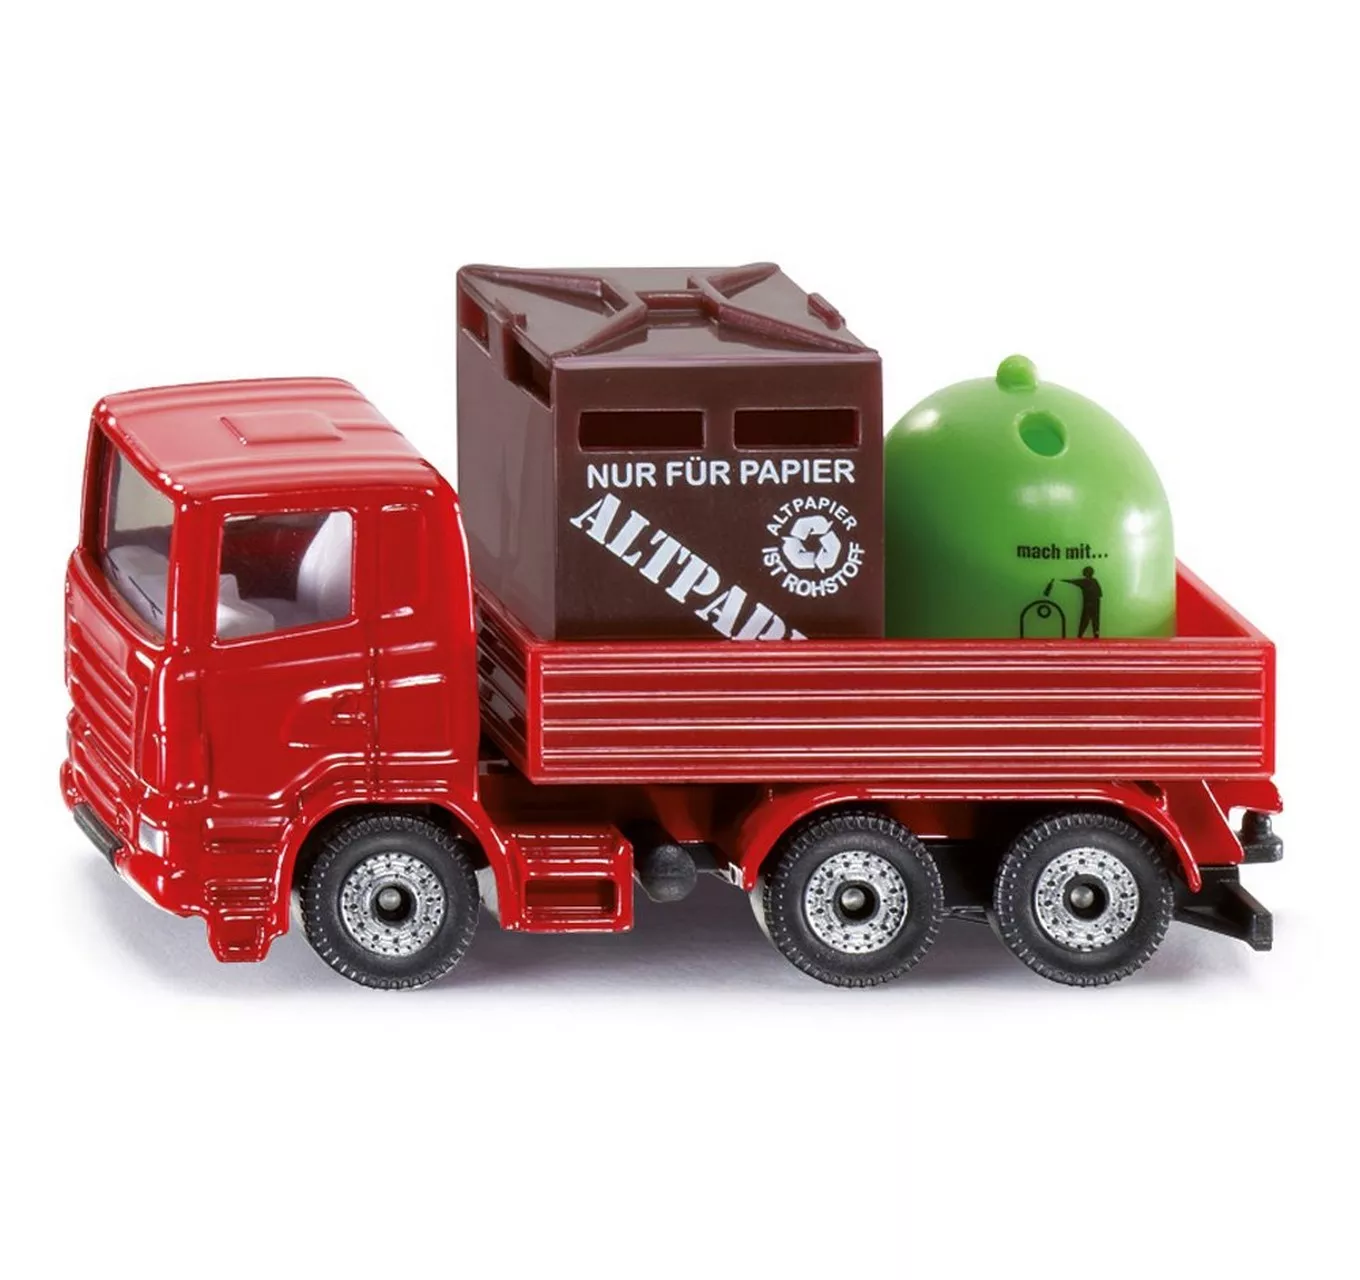 1:87 Recycling Truck